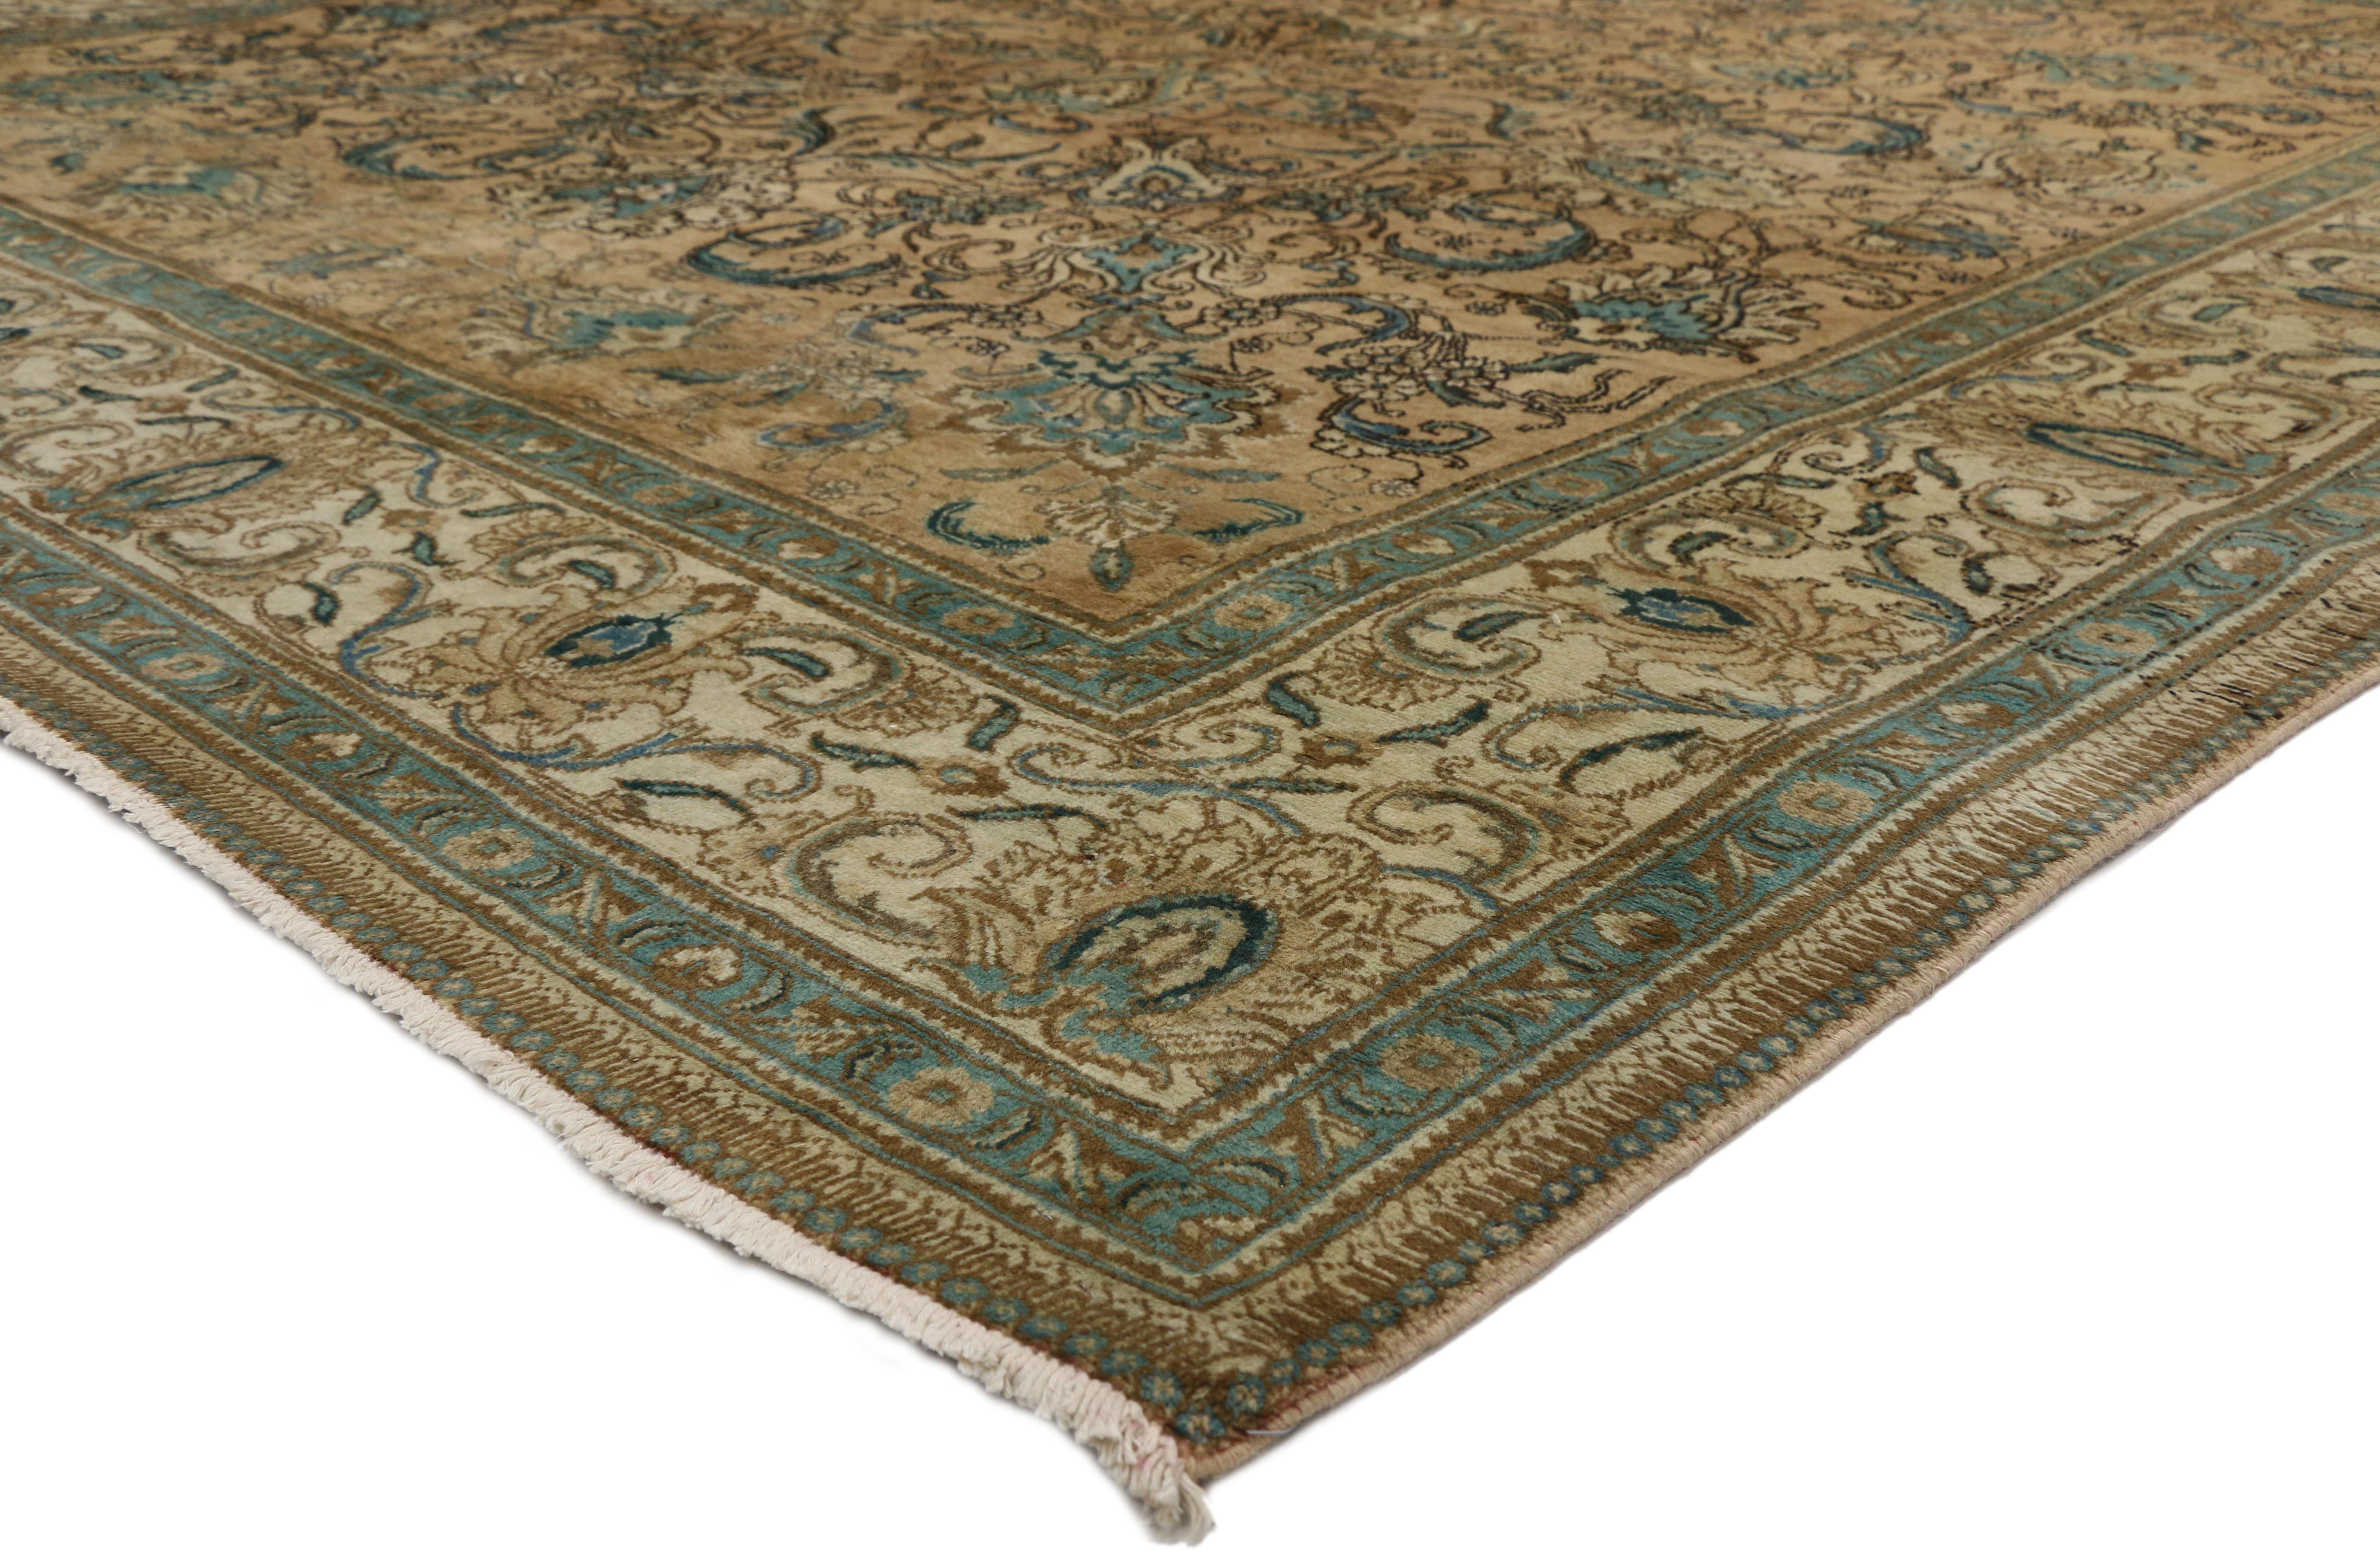 76449 Vintage Persian Tabriz Rug with Romantic Georgian Style 10’00 x 16’00. Regal and refined with a timeless design,this hand-knotted wool vintage Persian Tabriz rug is poised to impress. The abrashed tan colored field beautifully displays an